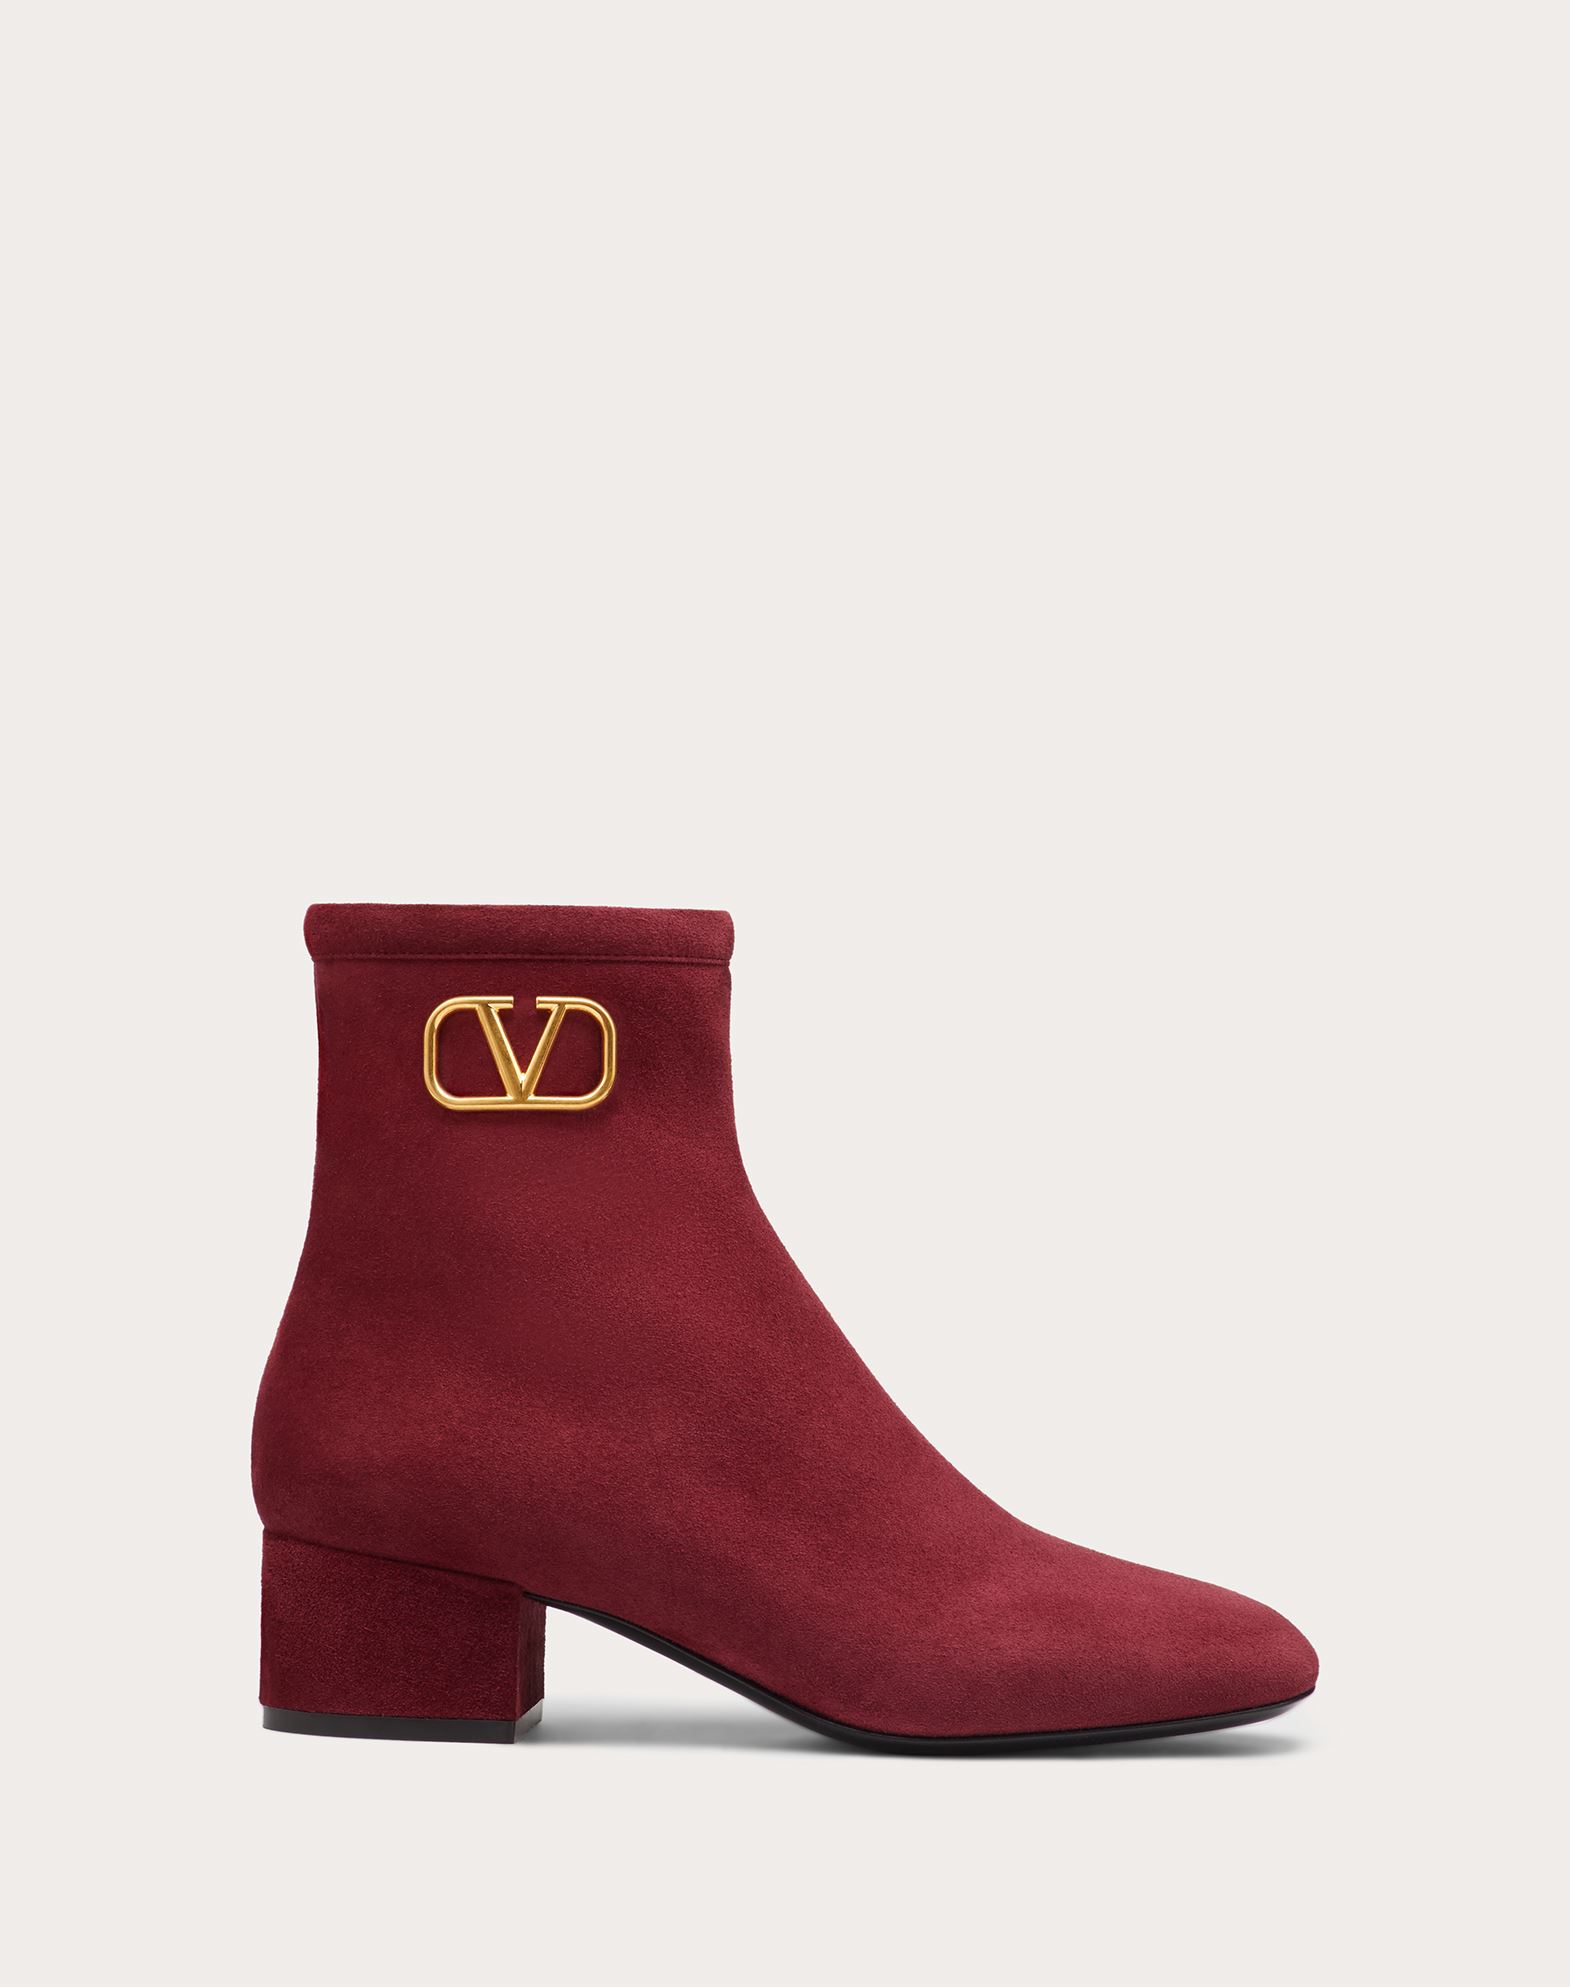 VLogo Signature Suede Ankle Boot 45 mm 